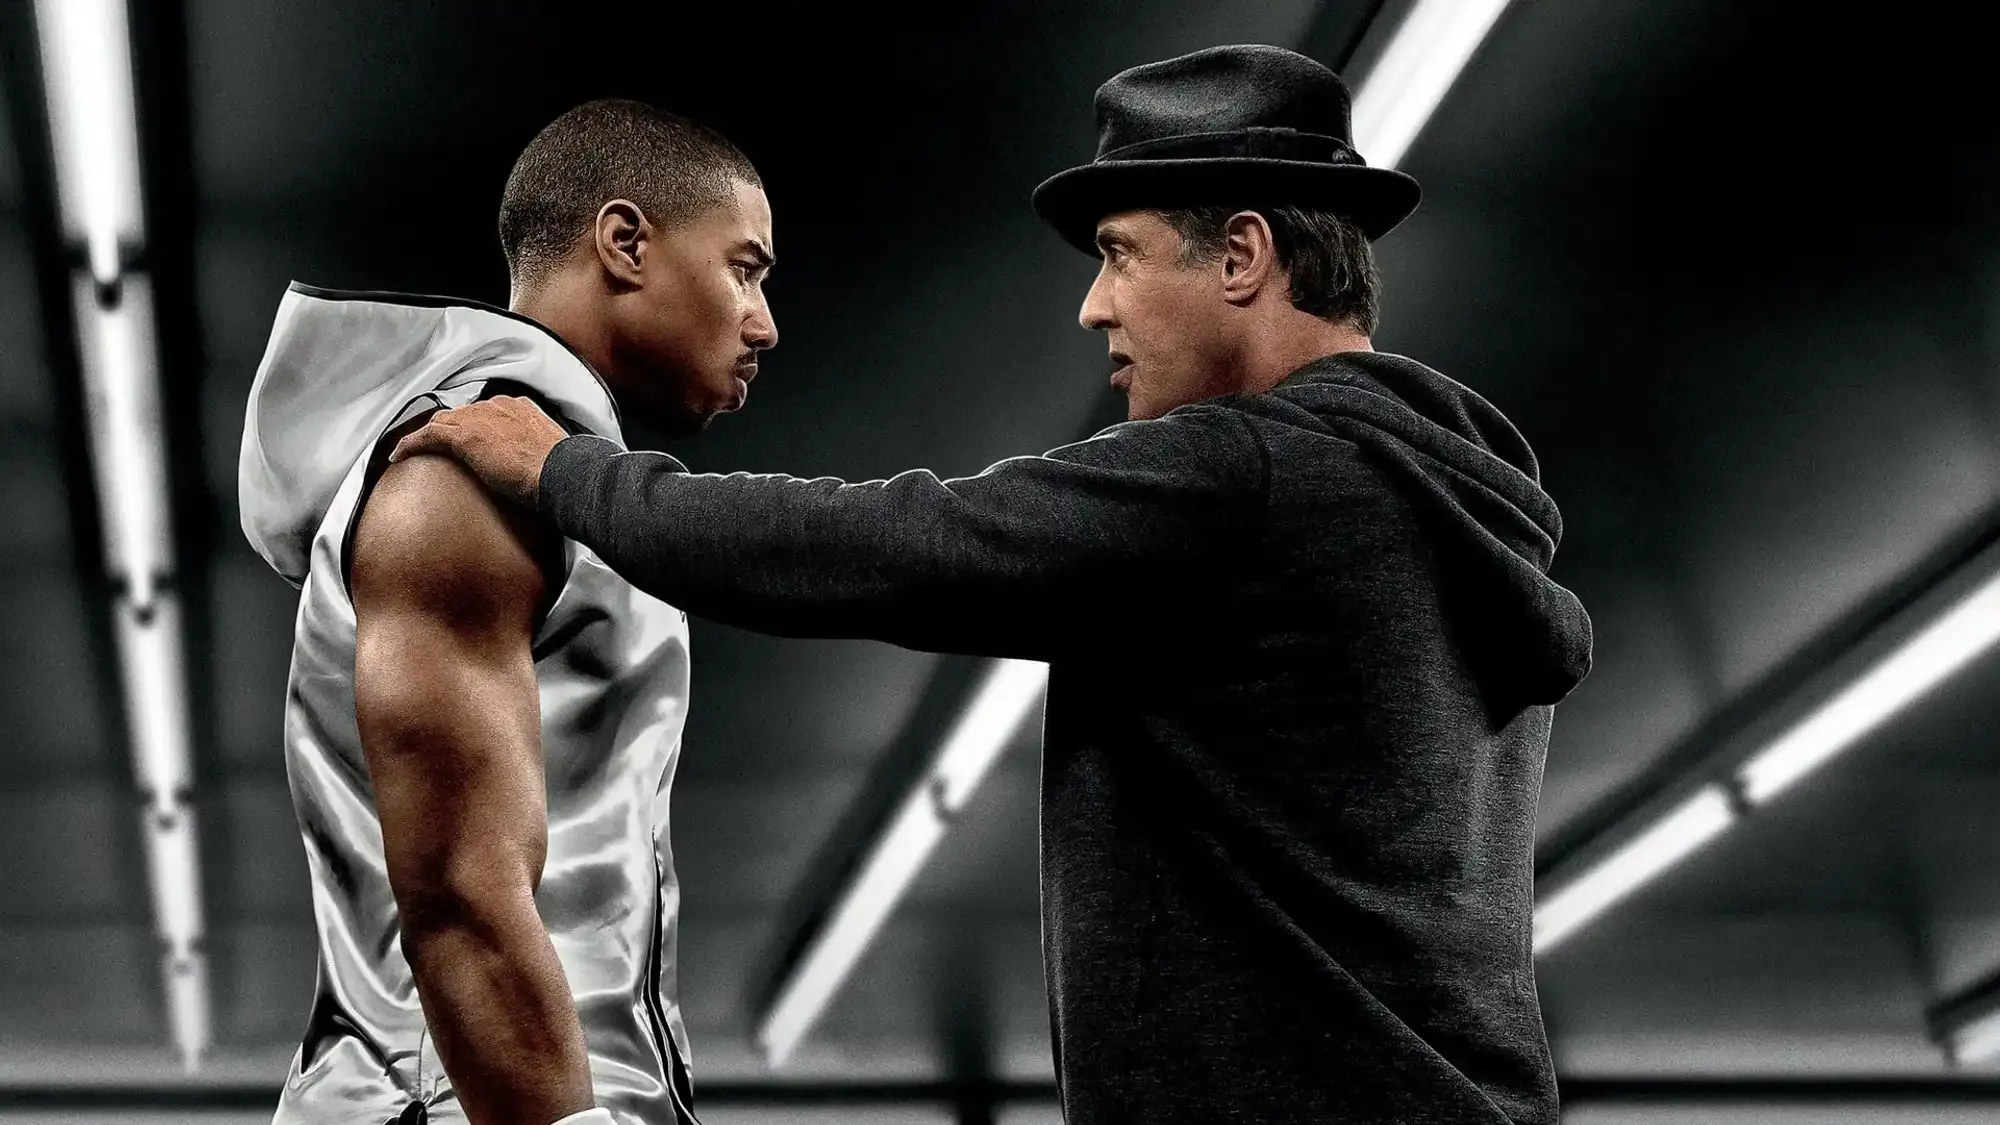 Creed movie review